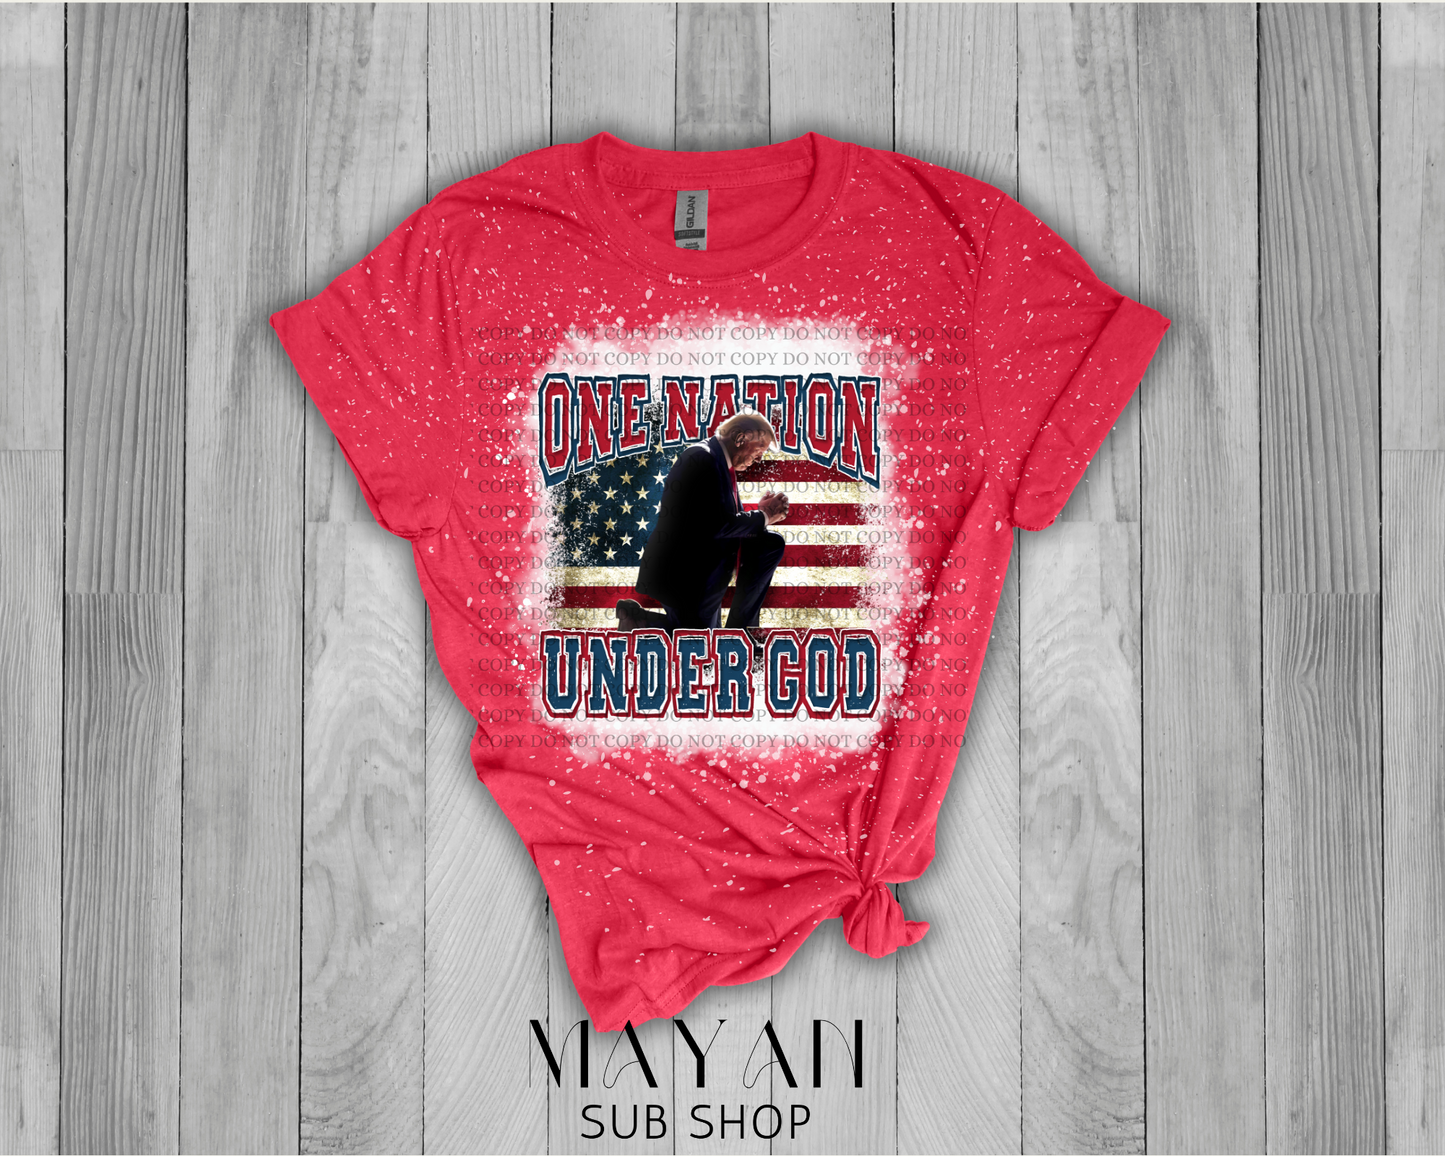 One nation under God in heather red bleached shirt. - Mayan Sub Shop